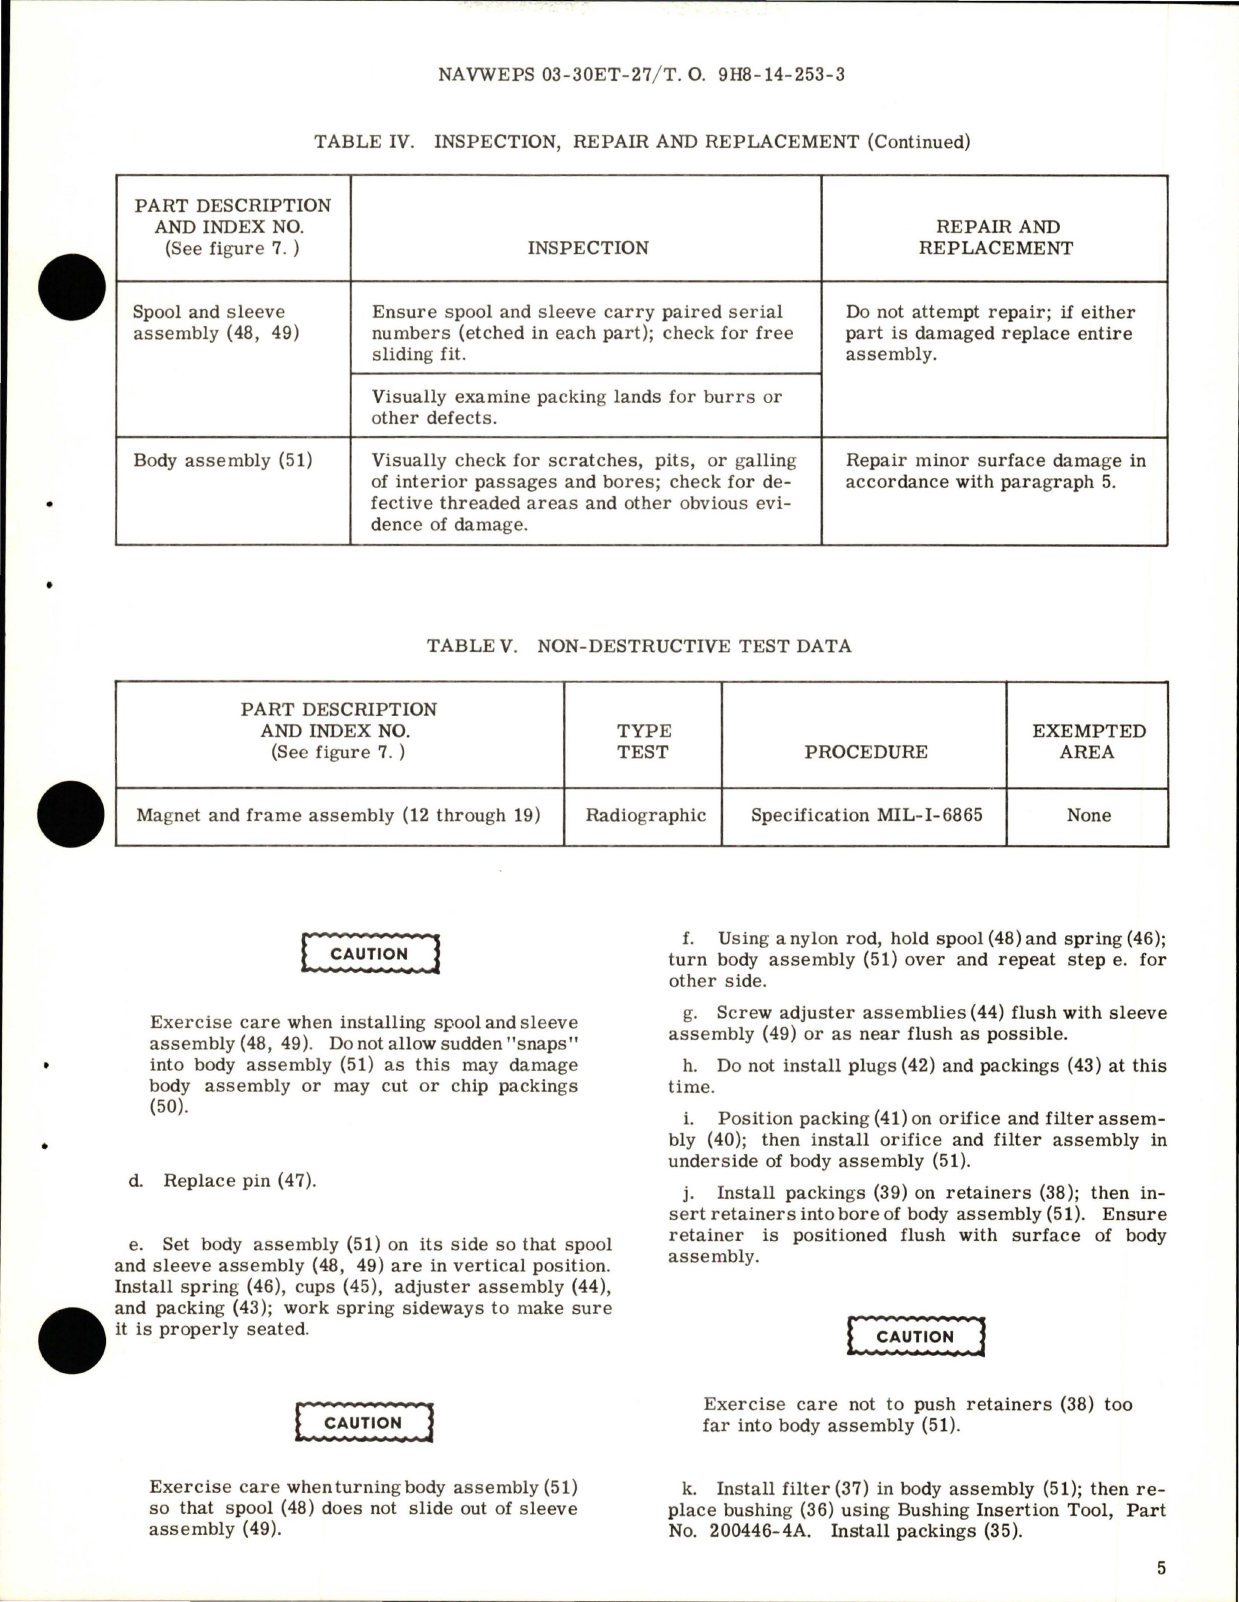 Sample page 7 from AirCorps Library document: Overhaul Instructions with Parts Breakdown for Motor Operated Gate Valve - Part AV16B1638B 